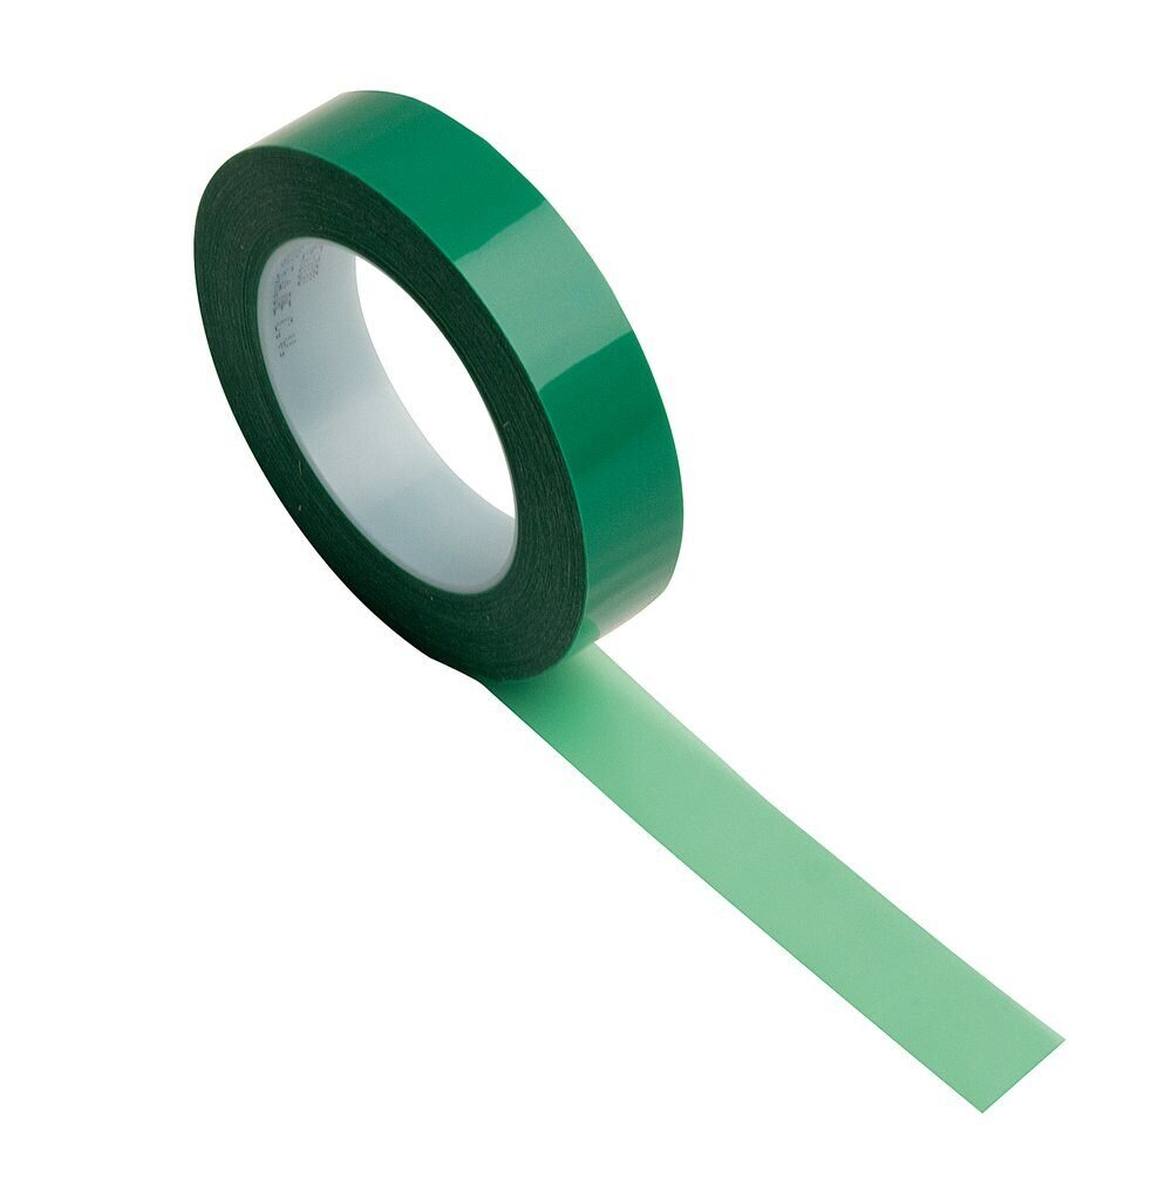 3M High-temperature polyester adhesive tape 851, green, 304.8 mm x 66 m, 101.6 Âµm